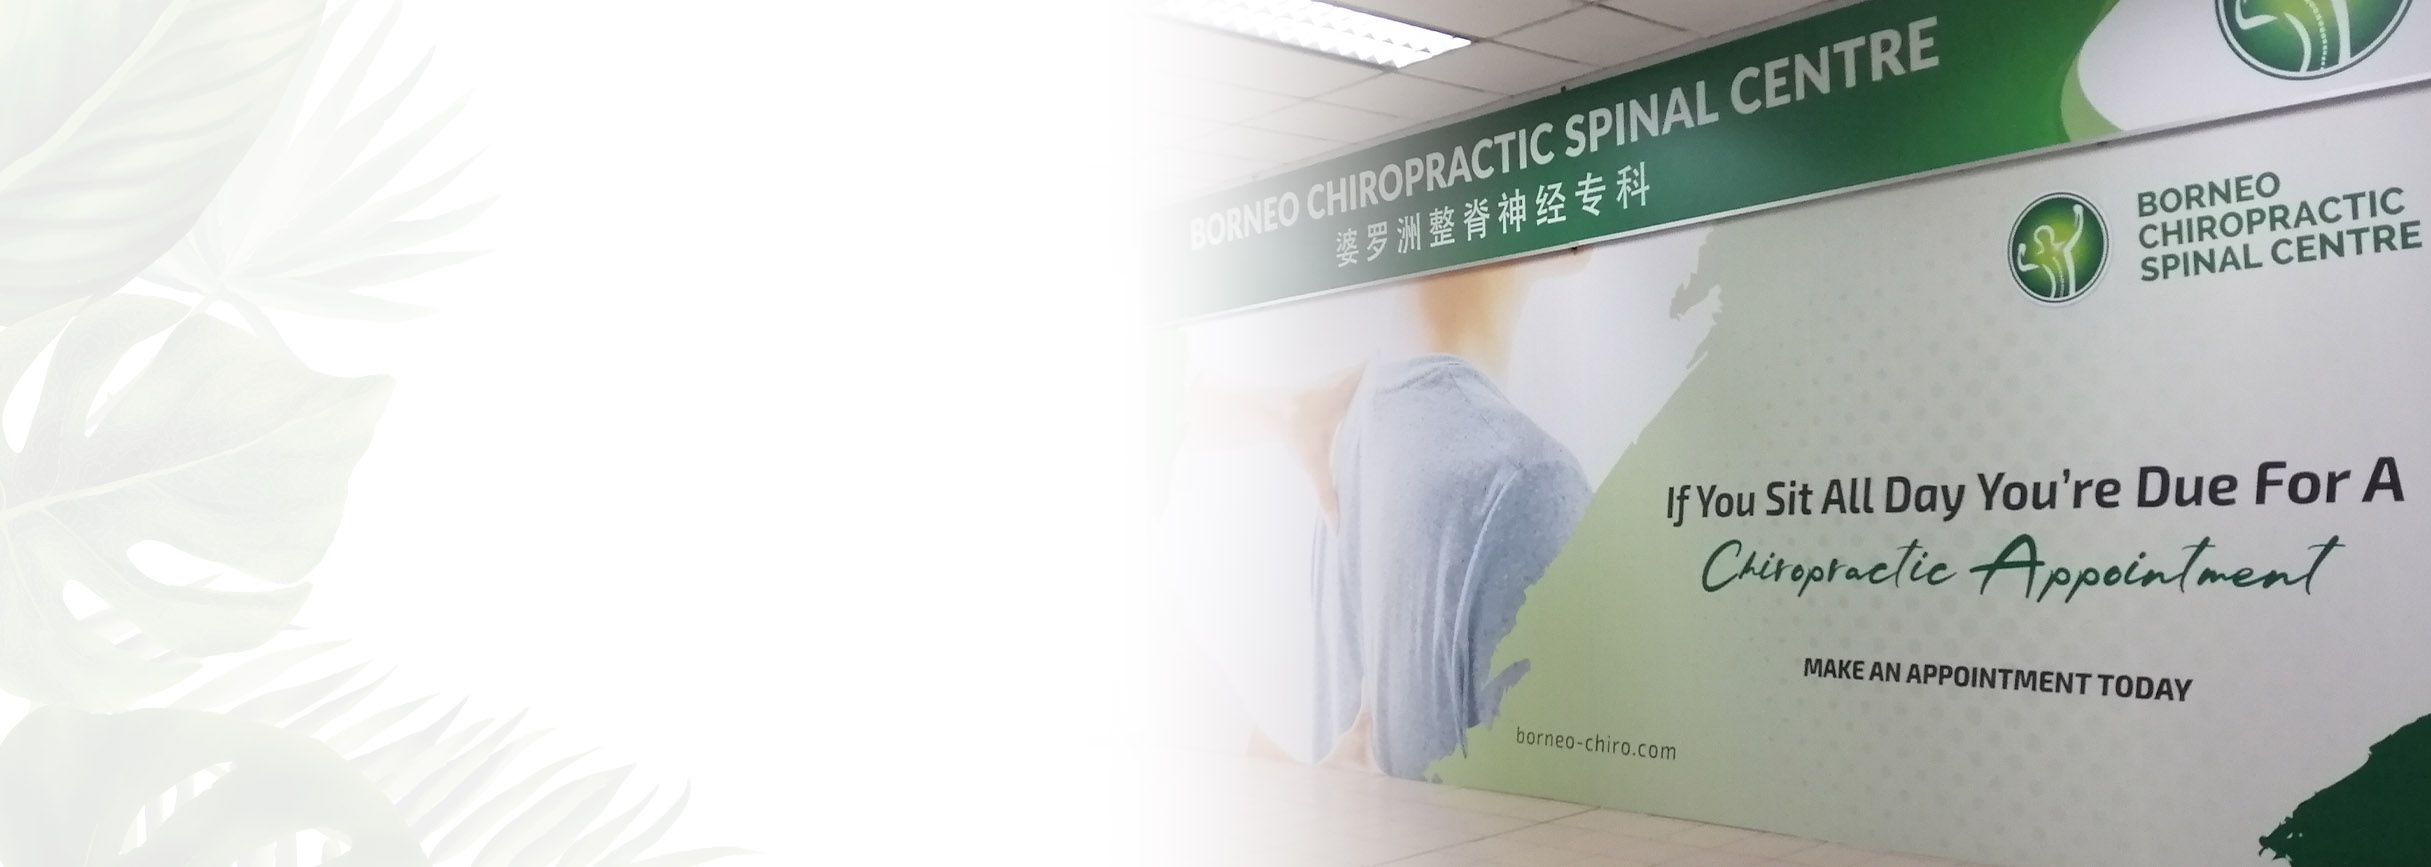 Chiropractic Services <span>That You Can Trust</span>